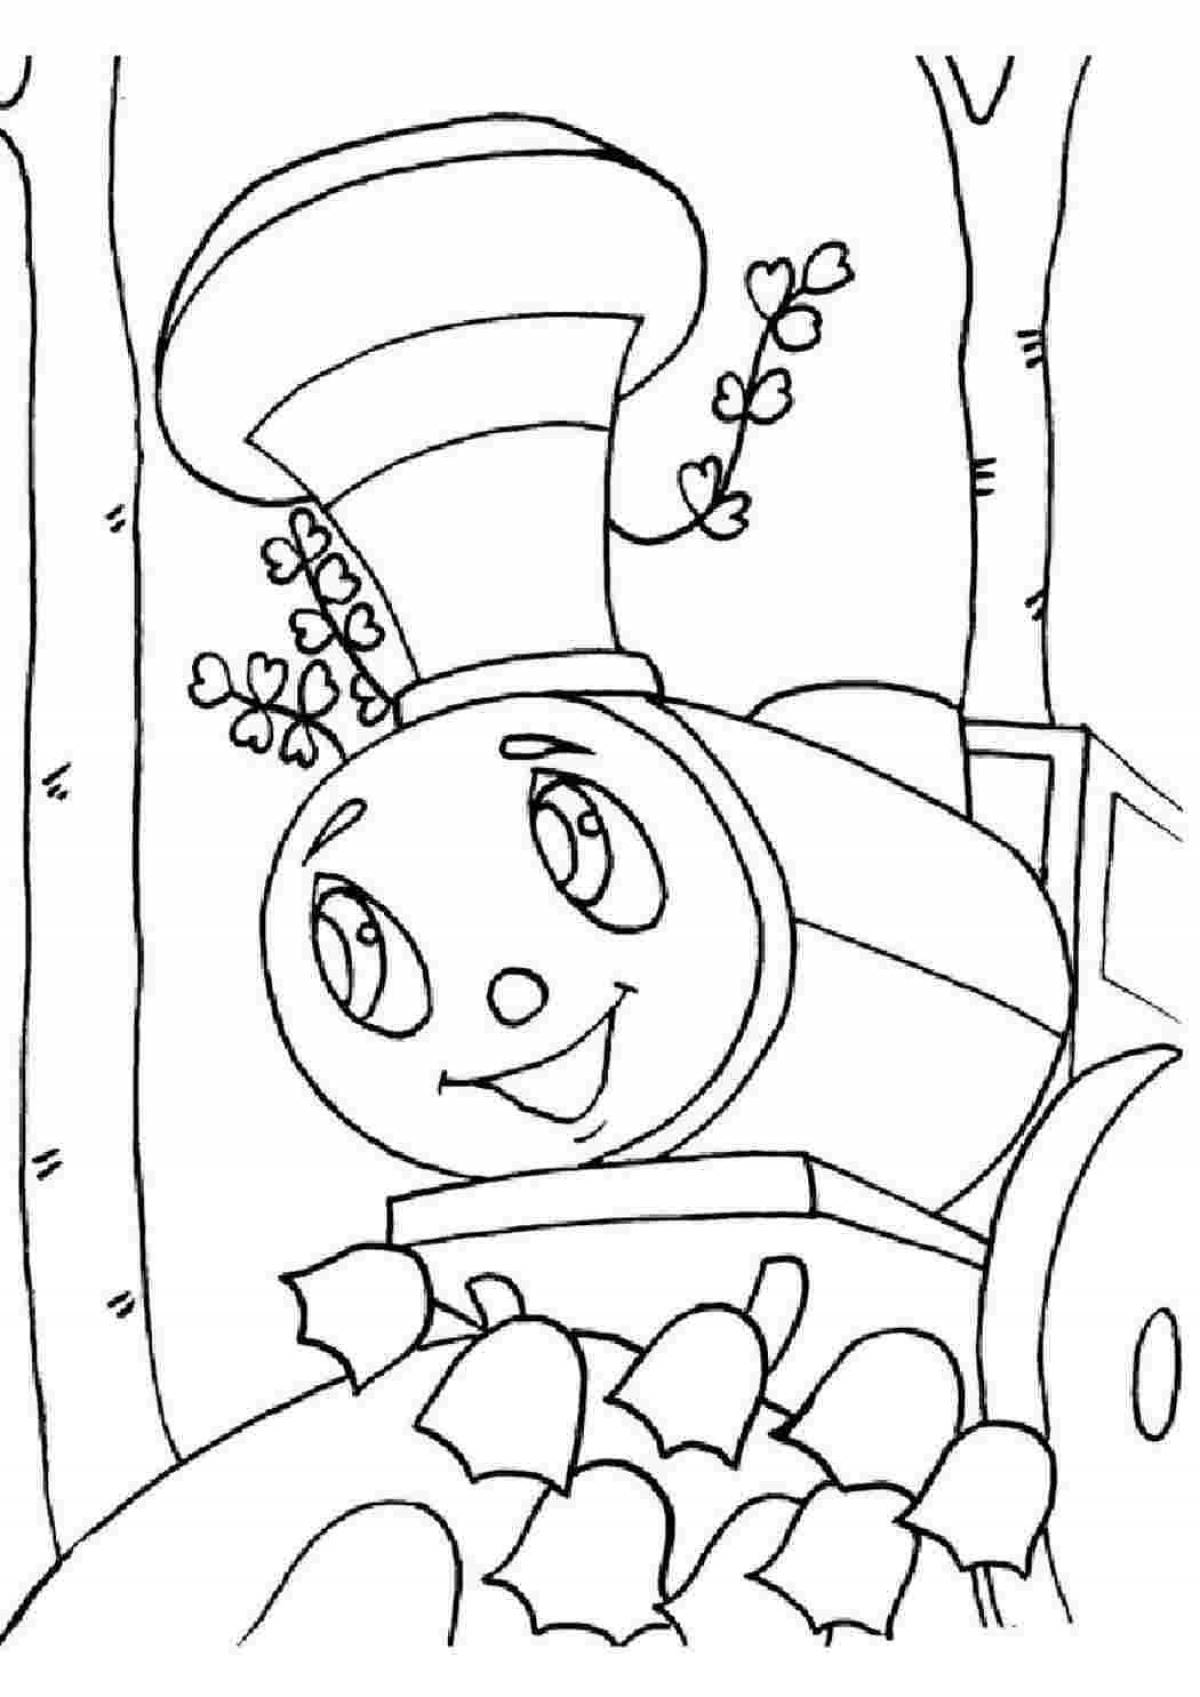 Adorable train coloring page for 2-3 year olds